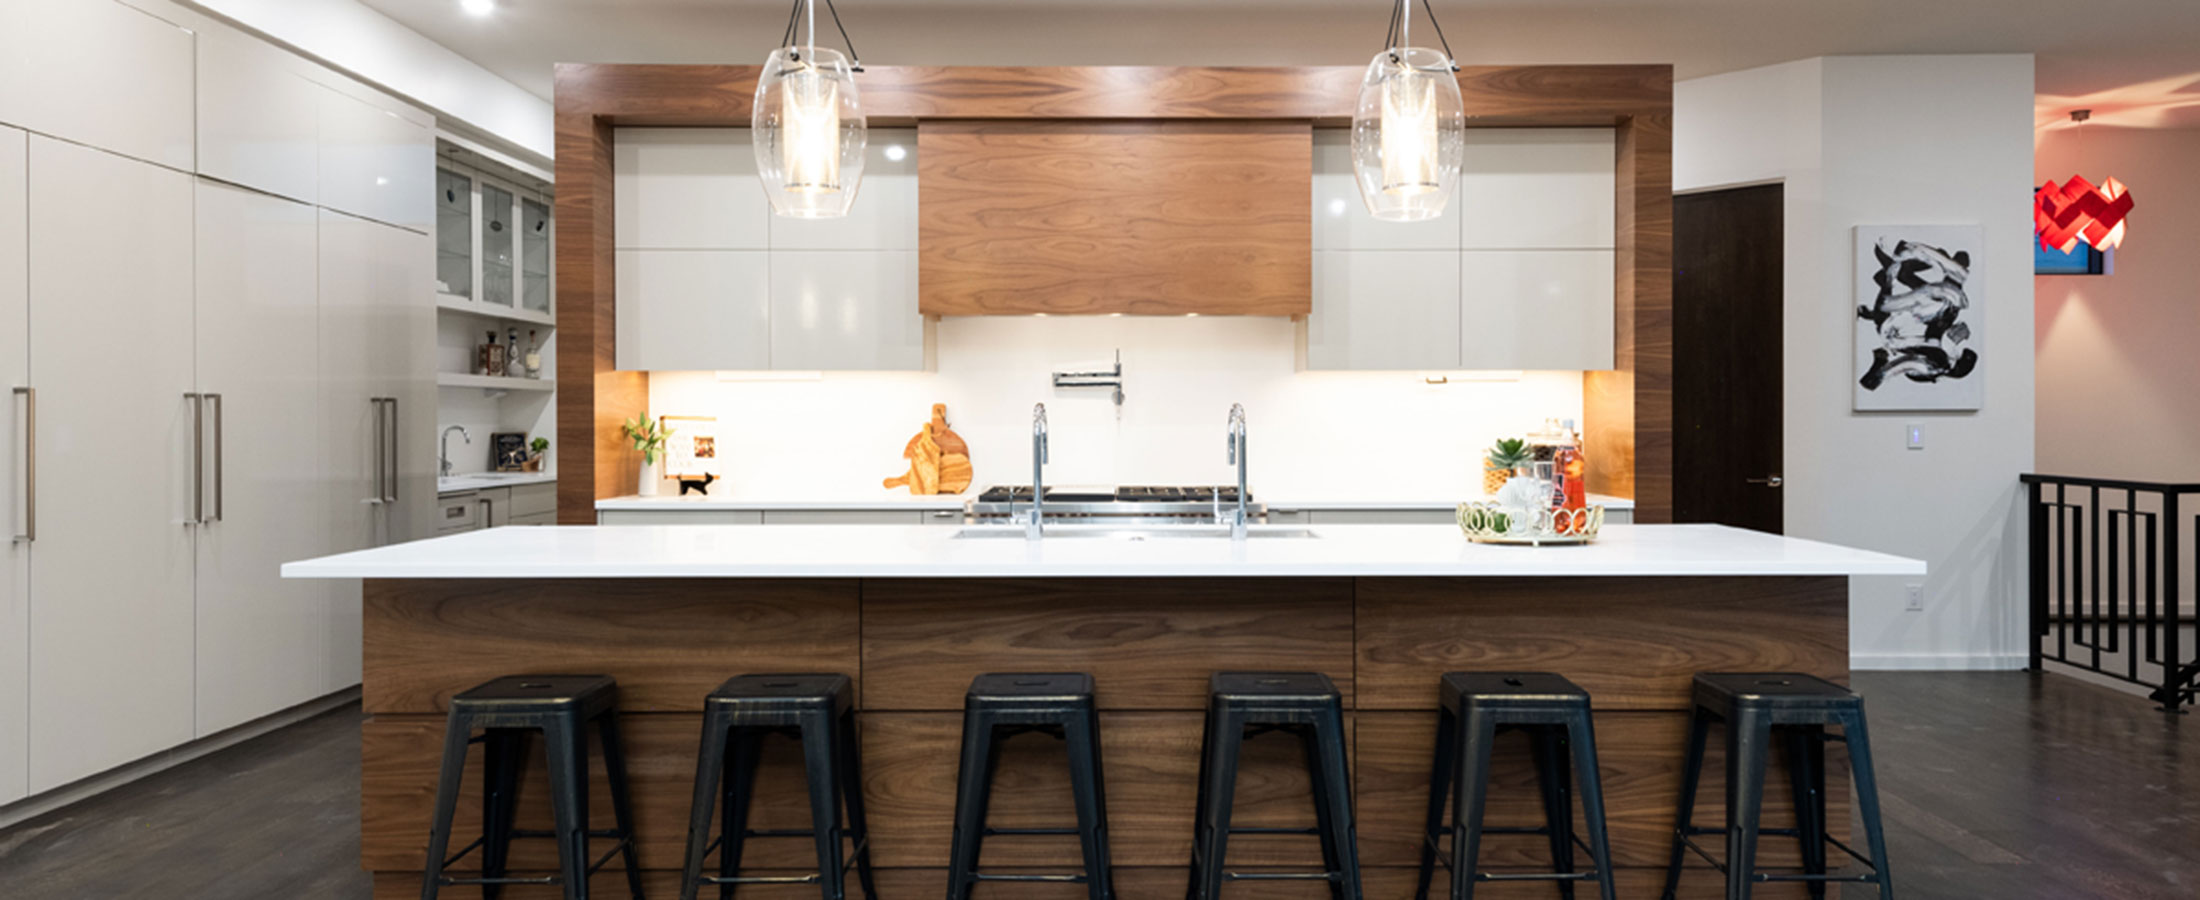 kitchen with bar stools and glass pendant lights